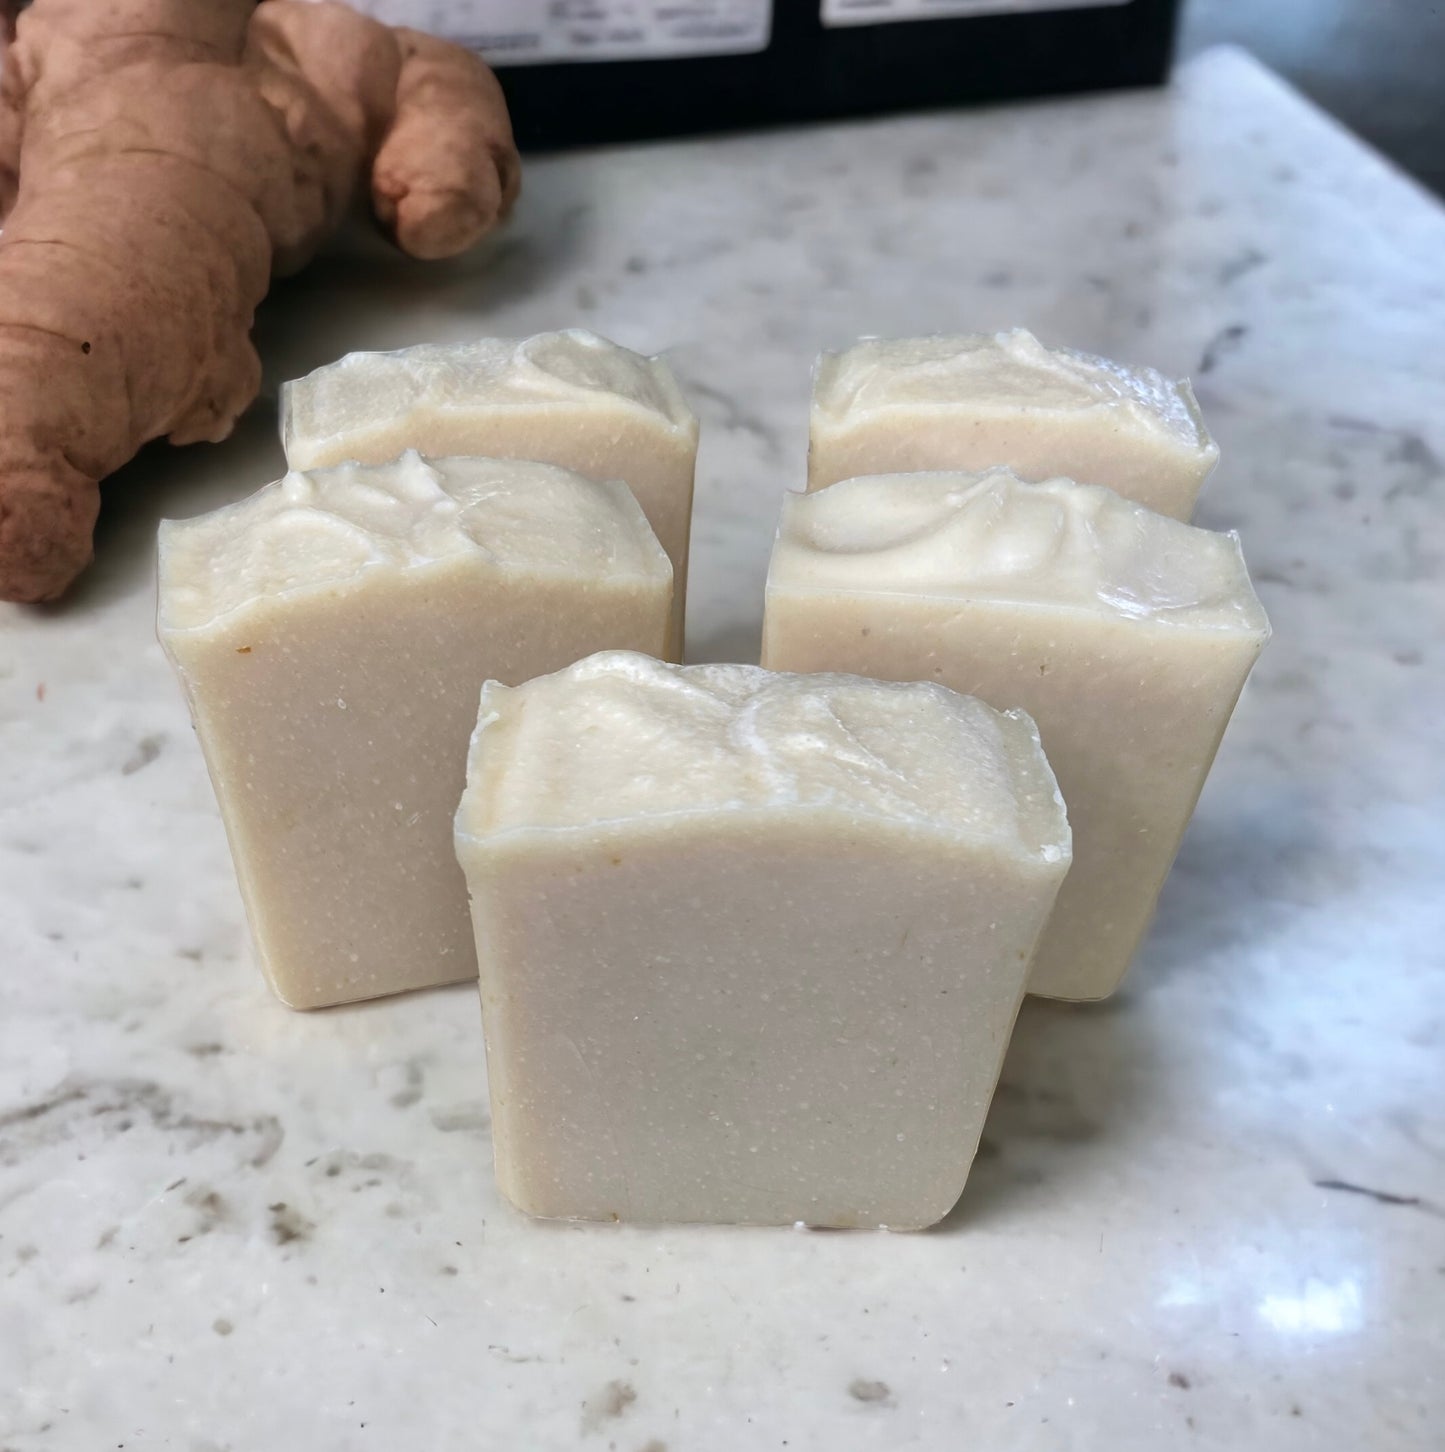 Ginger All Natural Soap Unscented & Uncolored